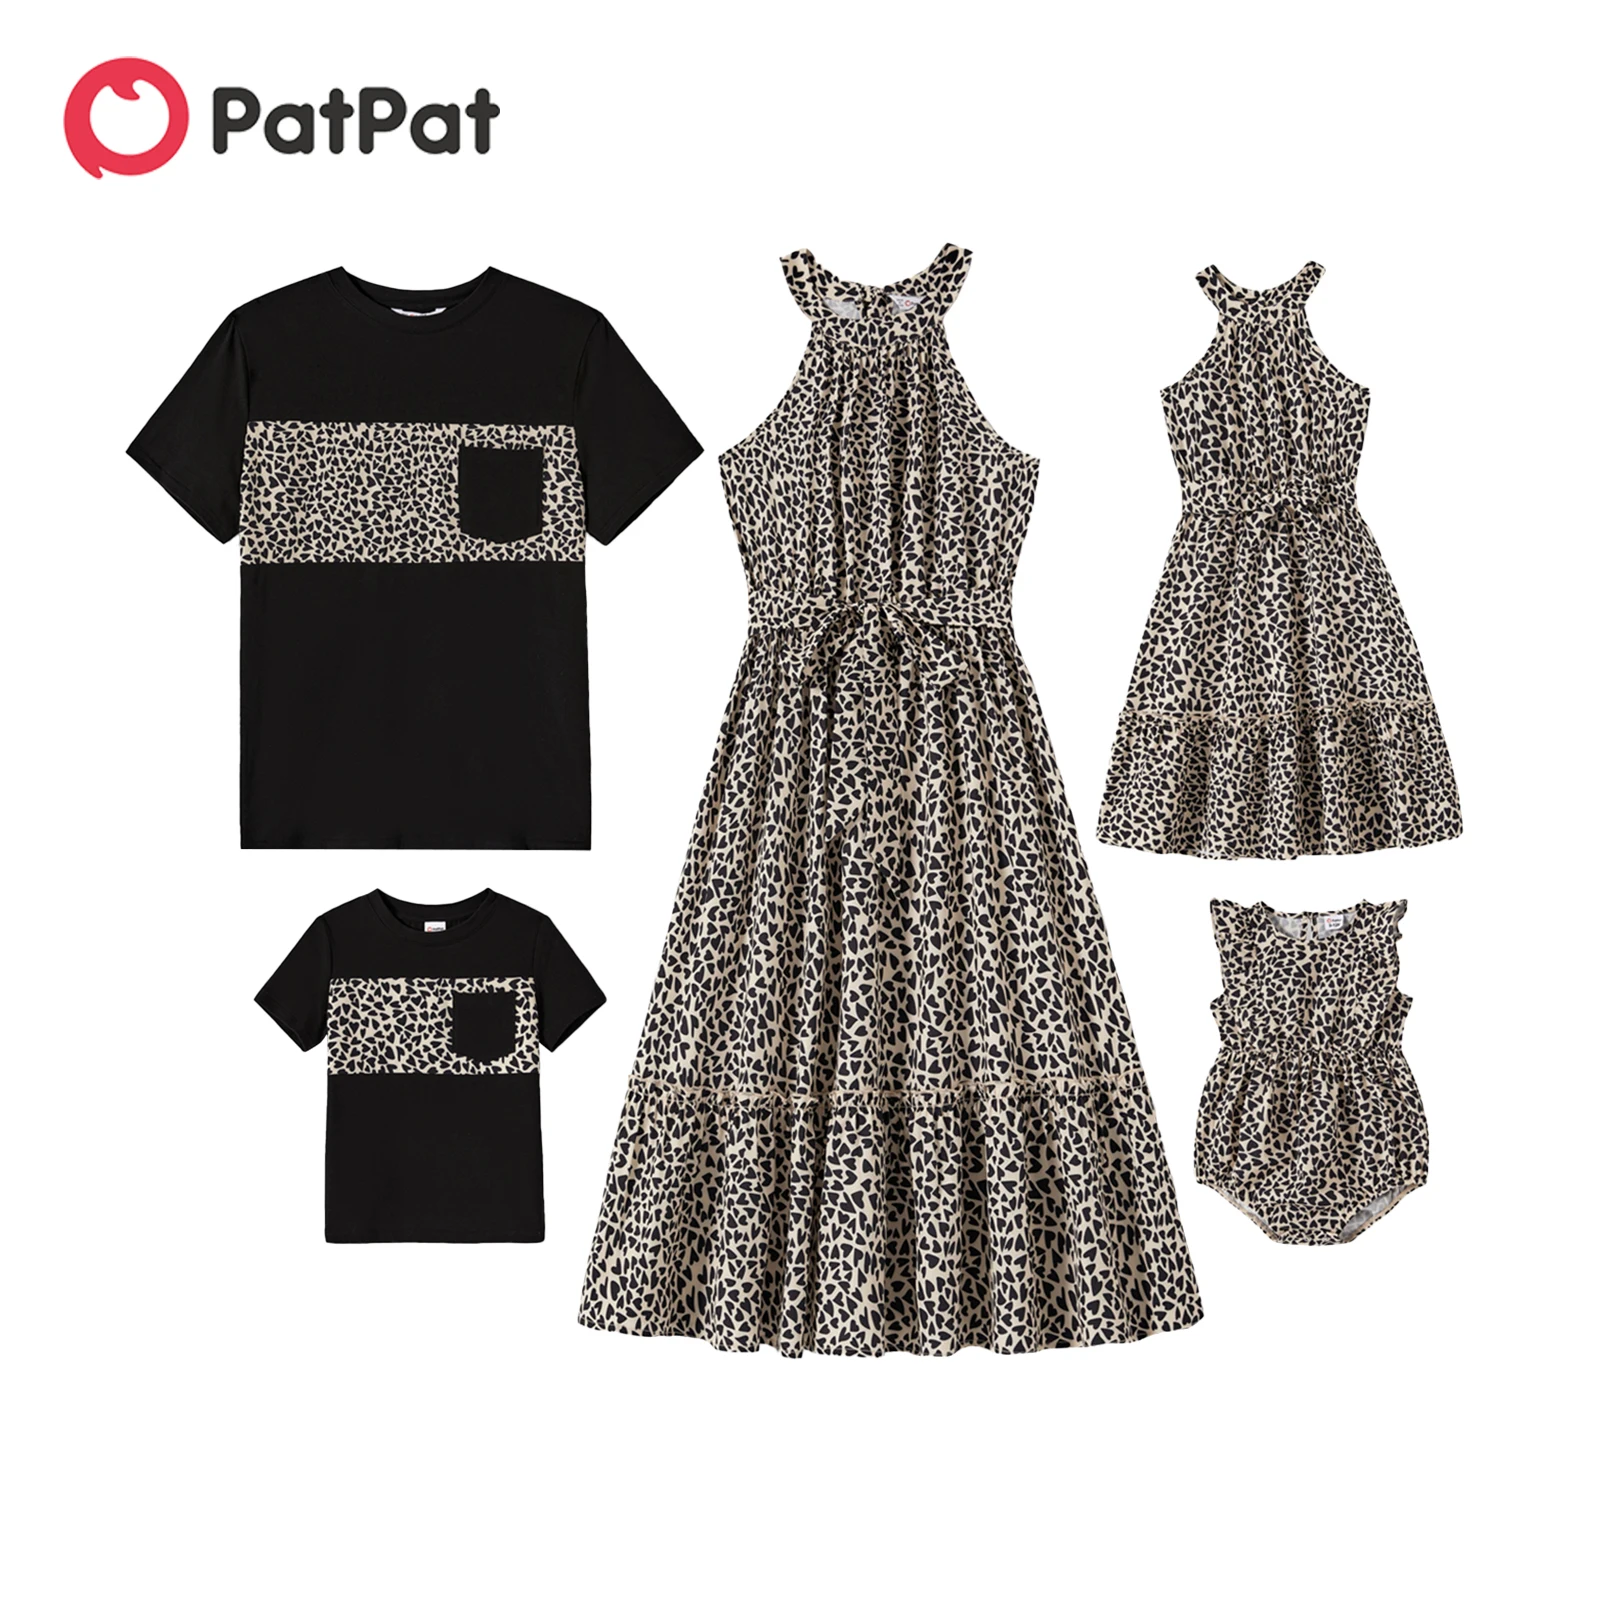 

PatPat Family Matching Outfits Cotton Short-sleeve Spliced T-shirts and Leopard Print Halter Neck Sleeveless Belted Dresses Sets